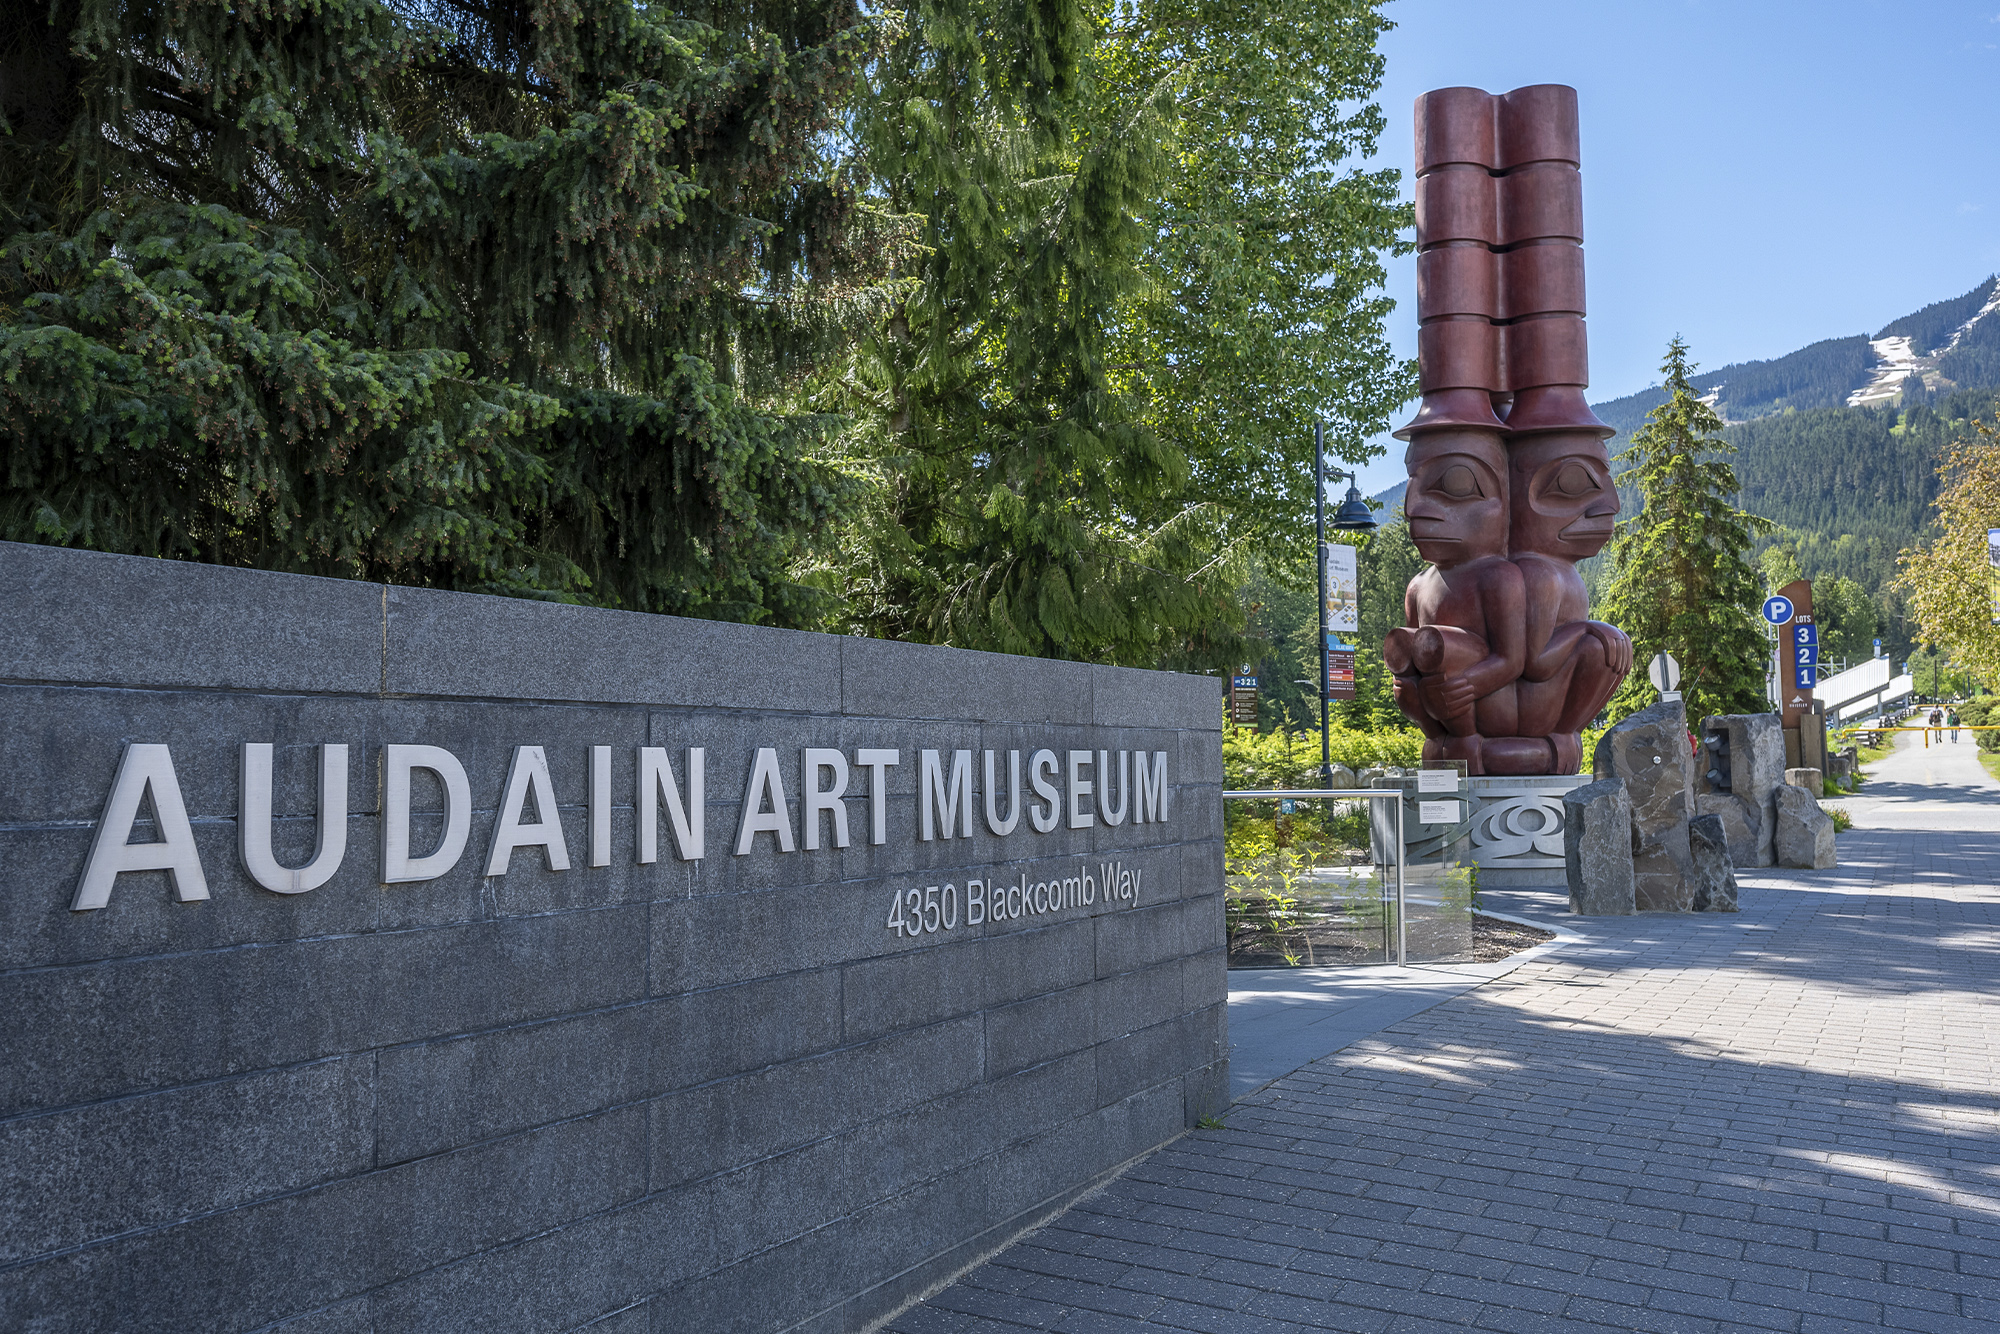 James Hart, The Three Watchmen, c. 2021, bronze with red ocher patina, Audain Art Museum Collection, Funded by the Audain Foundation. Xwalacktun and Levi Nelson, Ti A7xa7 St'ak' (The Great Flood), 2021, waterjet cut aluminum and concrete, Audain Art Museum Collection, Funded by the Audain Foundation. Image by Scott Brammer Photography.